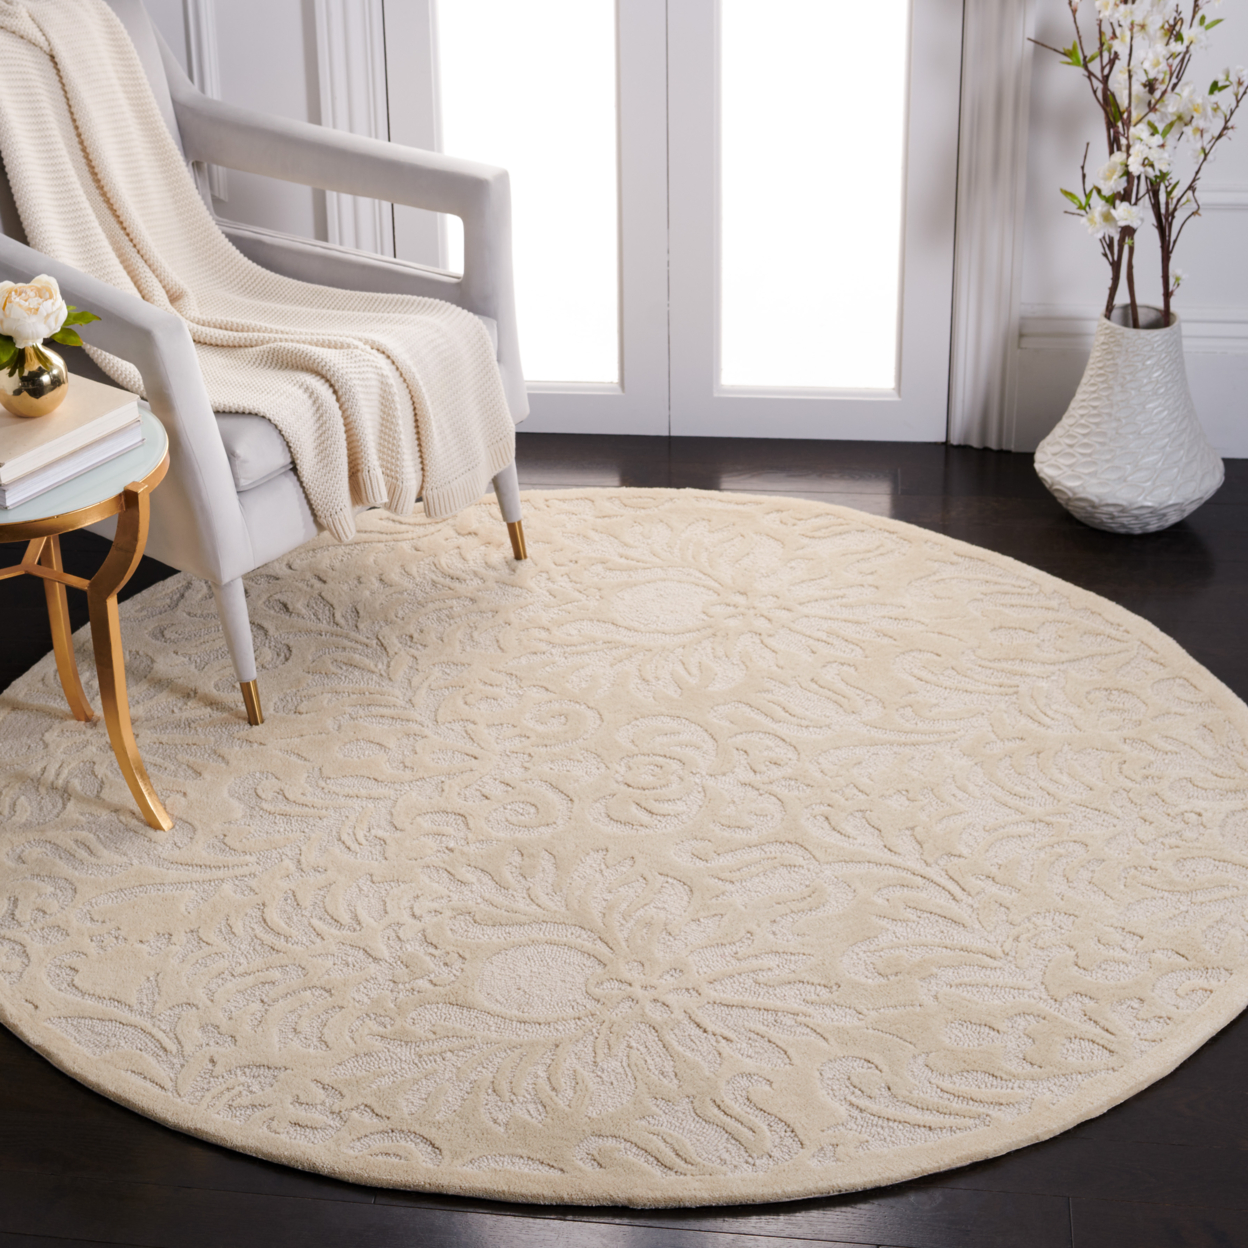 SAFAVIEH Total Performance TLP714F Hand-hooked Ivory Rug - 6' Round